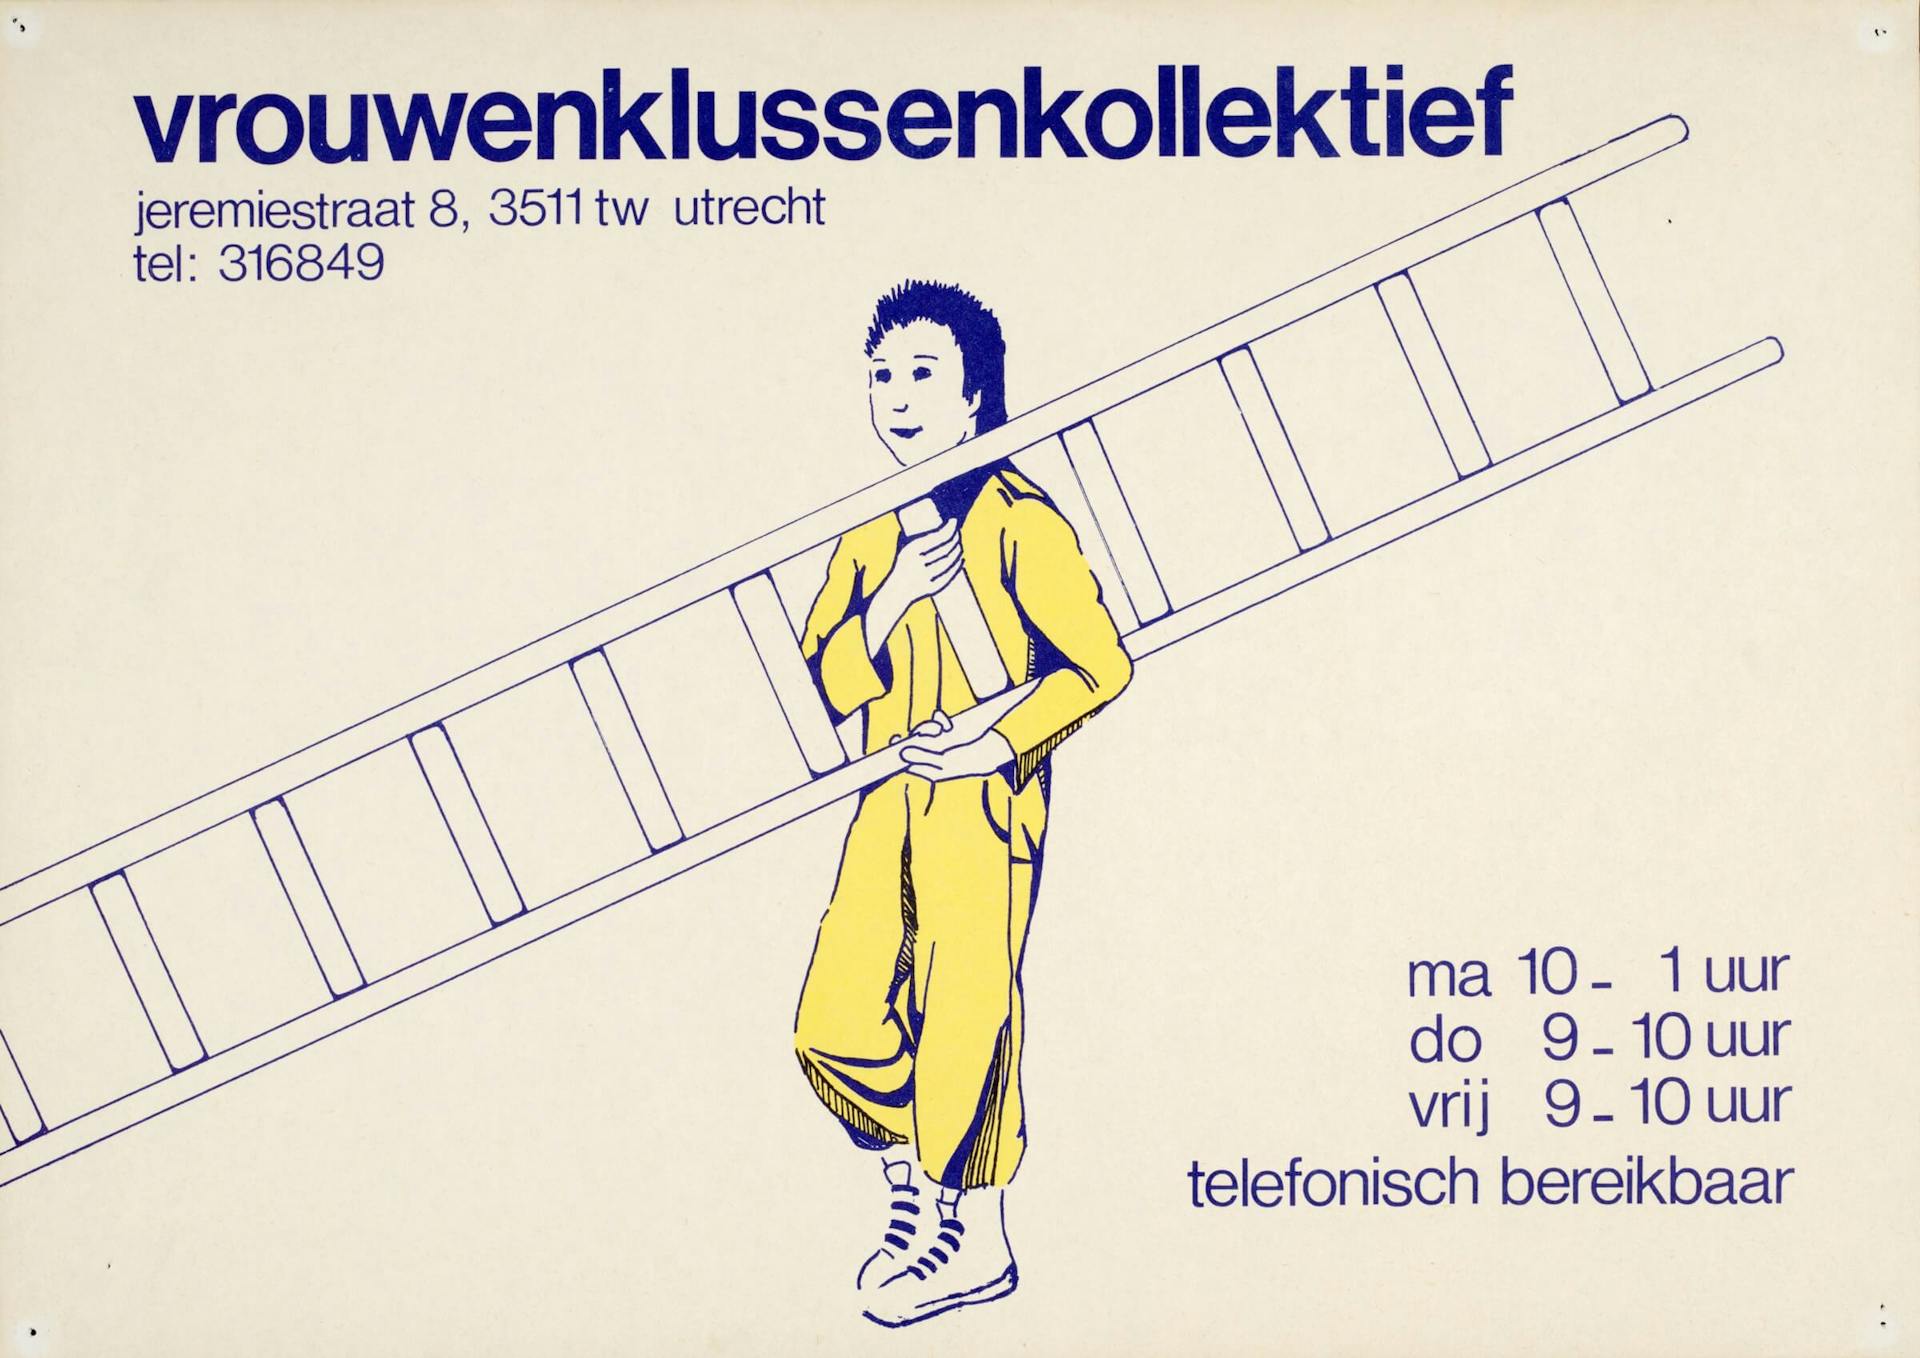 Poster for and by Vrouwenklussenkollektief [Women’s Construction Collective] Utrecht, 1980, design: unknown. Source: Collection IAV-Atria 